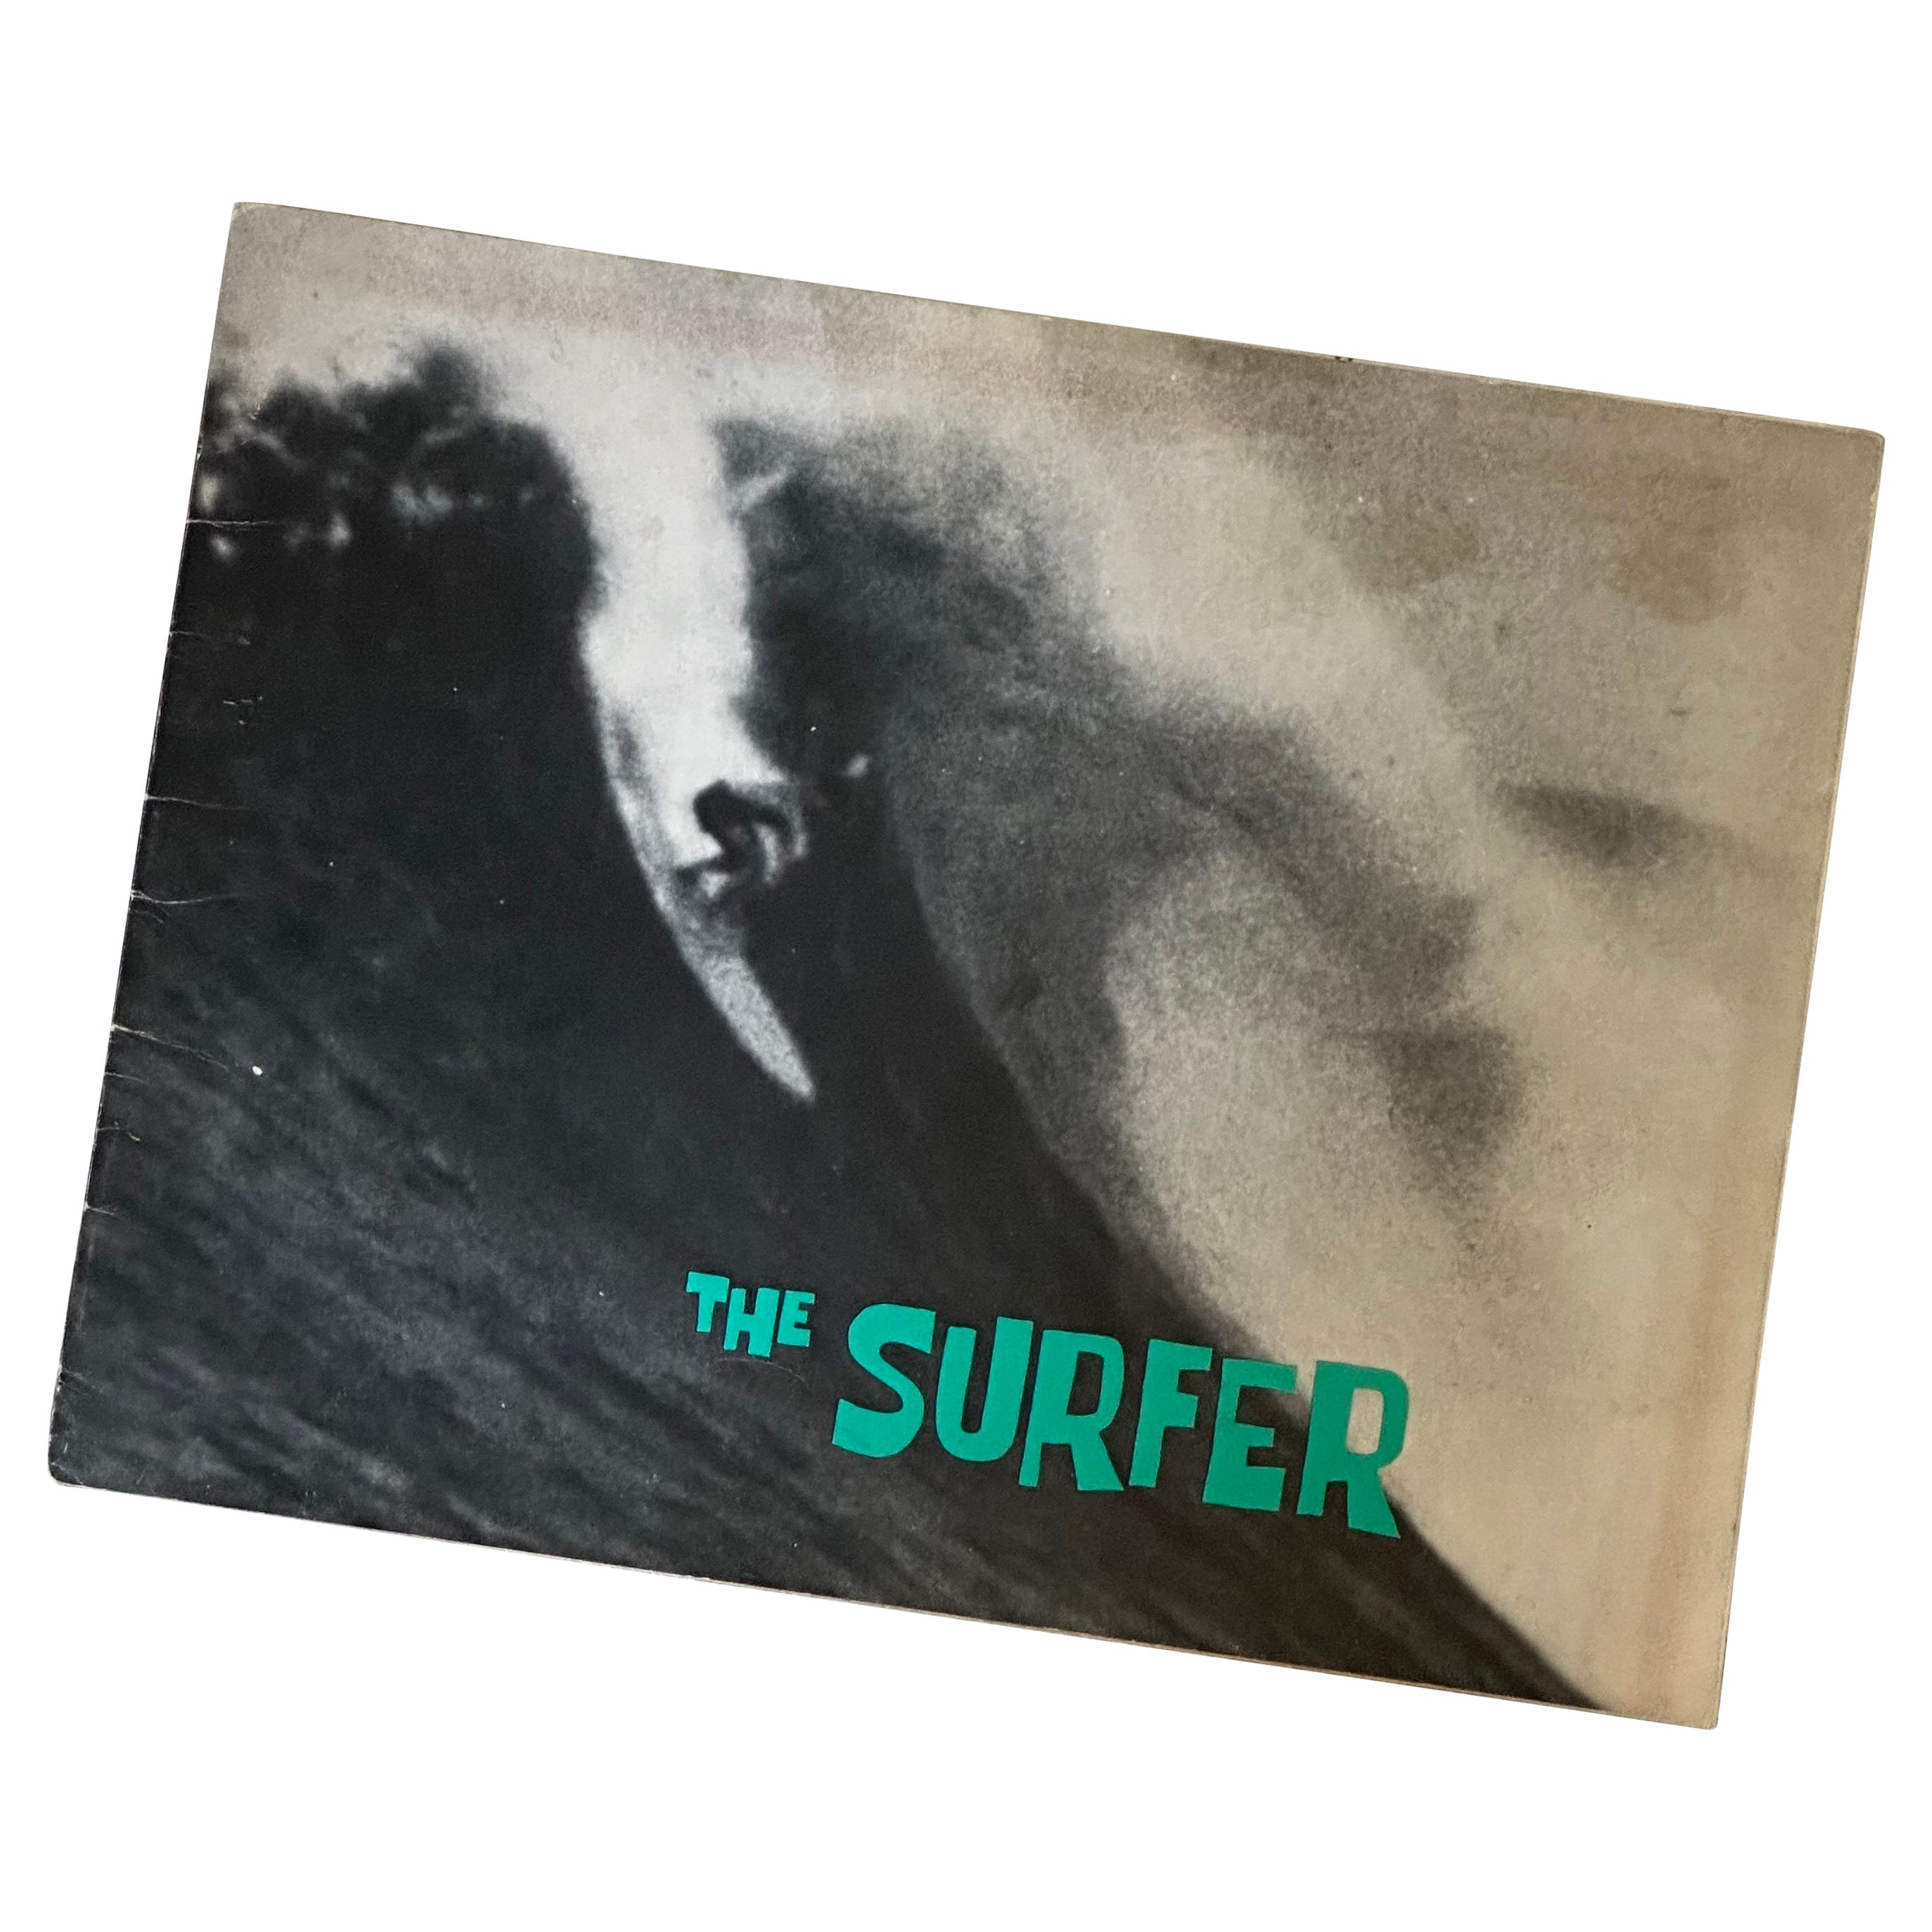 "THE SURFER" 1973 Reprint of the Original 1960 Surfer Magazine by John Severson For Sale